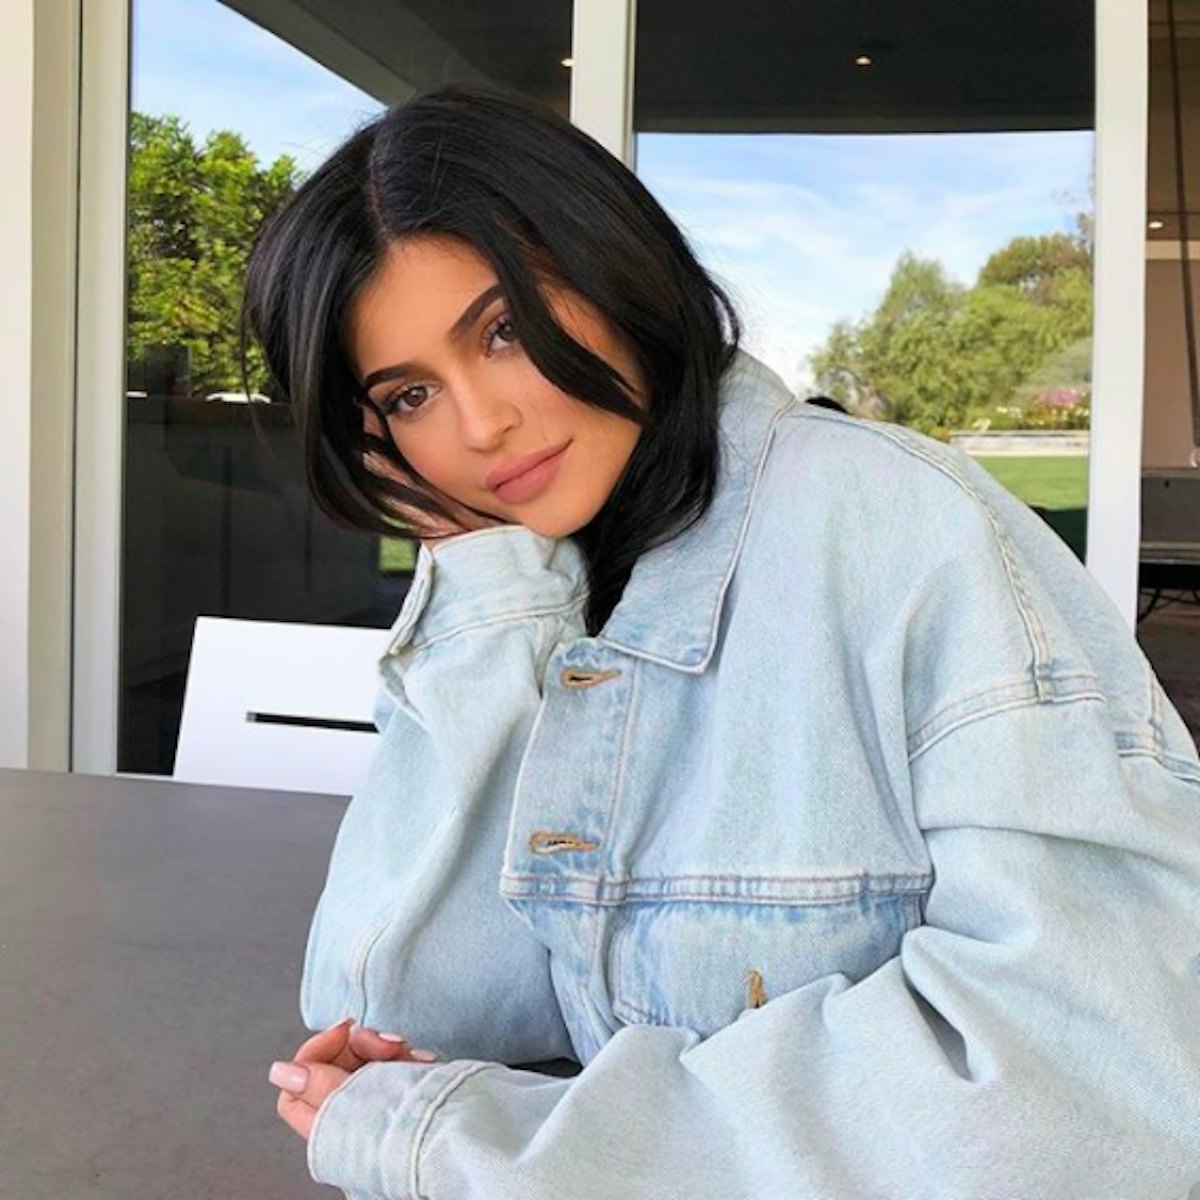 Kylie Jenner Is Keeping Her Pregnancy A Secret Because She S Lived Her Life Publicly